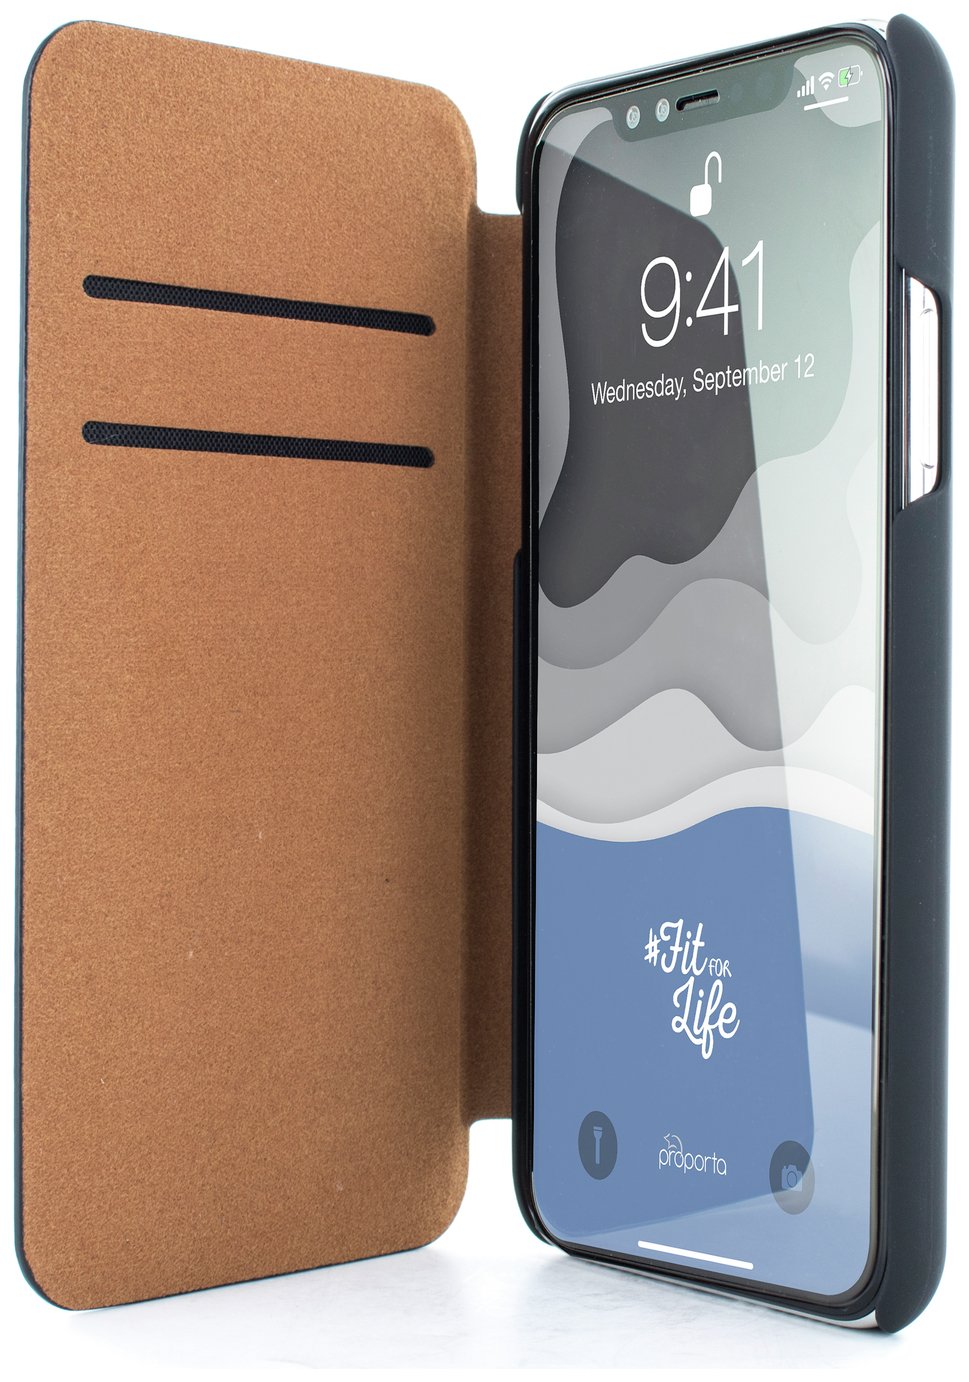 Proporta iPhone Xs Max Leather Folio Phone Case Review